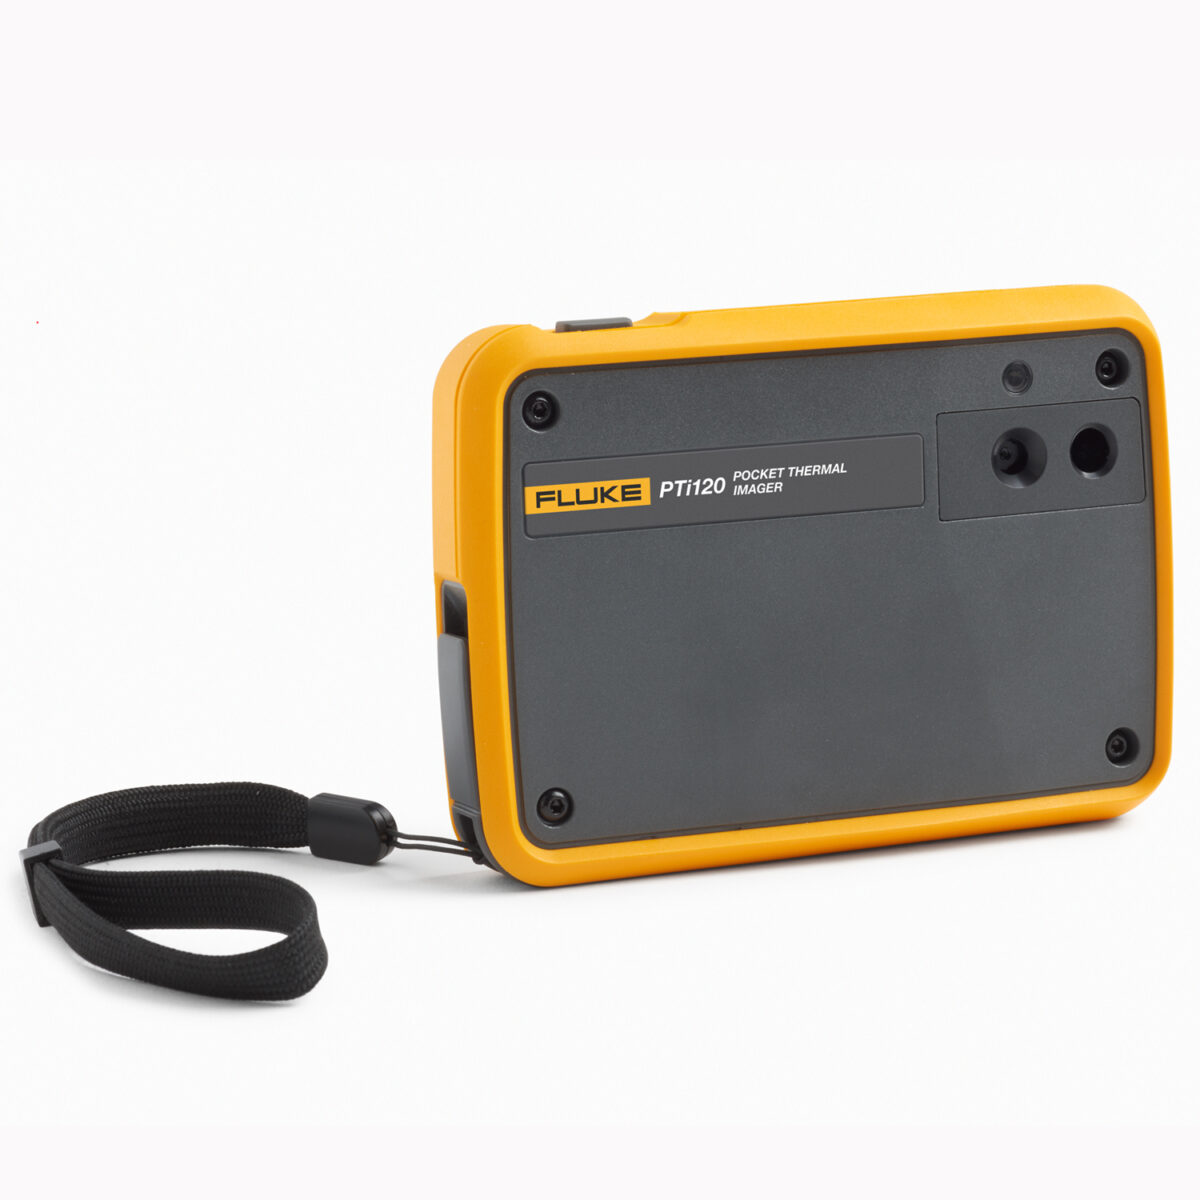 Fluke PTi120 Pocket Thermal Imager - with hand loop